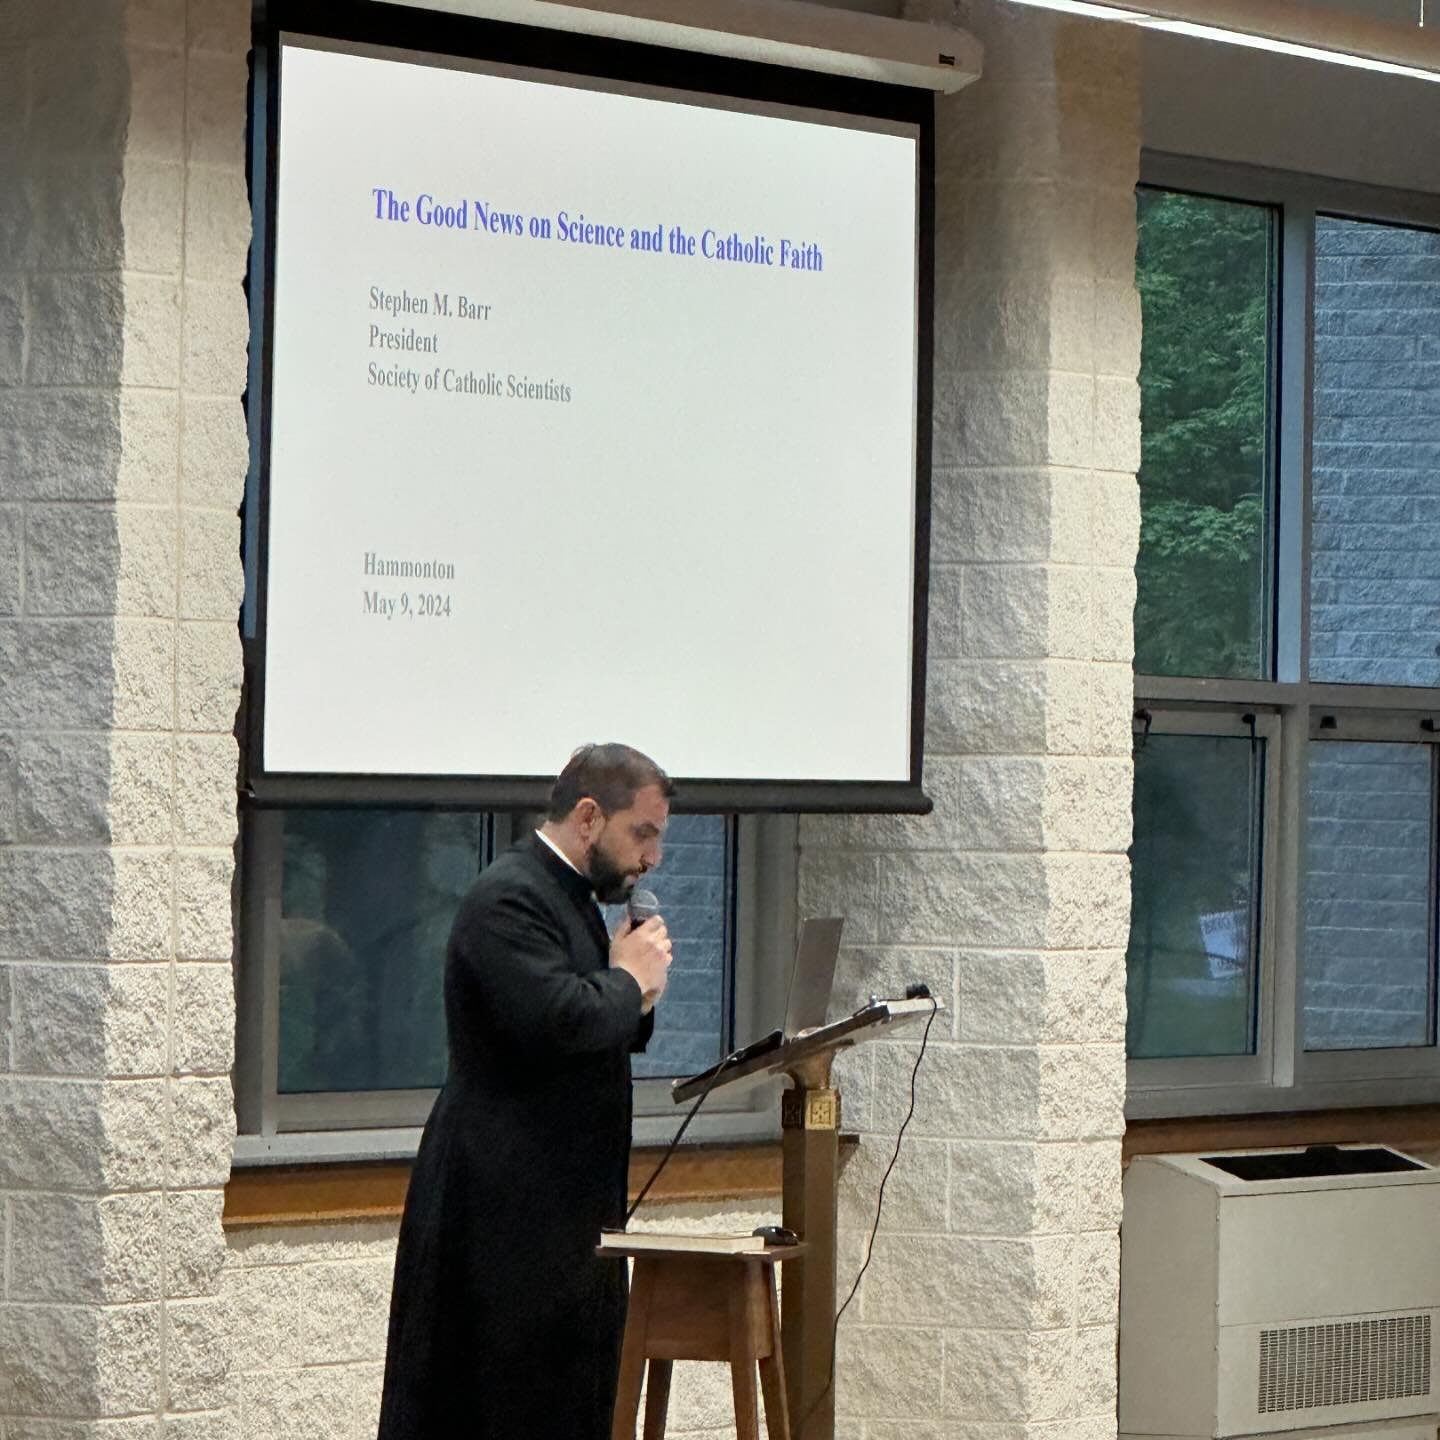 We heard an excellent talk tonight by Dr. Stephen Barr on the good news about Science &amp; the Catholic Faith! Thank you to Fr. Rivera for hosting it! 

#stbridgetuniversityparish #newman #rowancatholic  #service #faithandscience